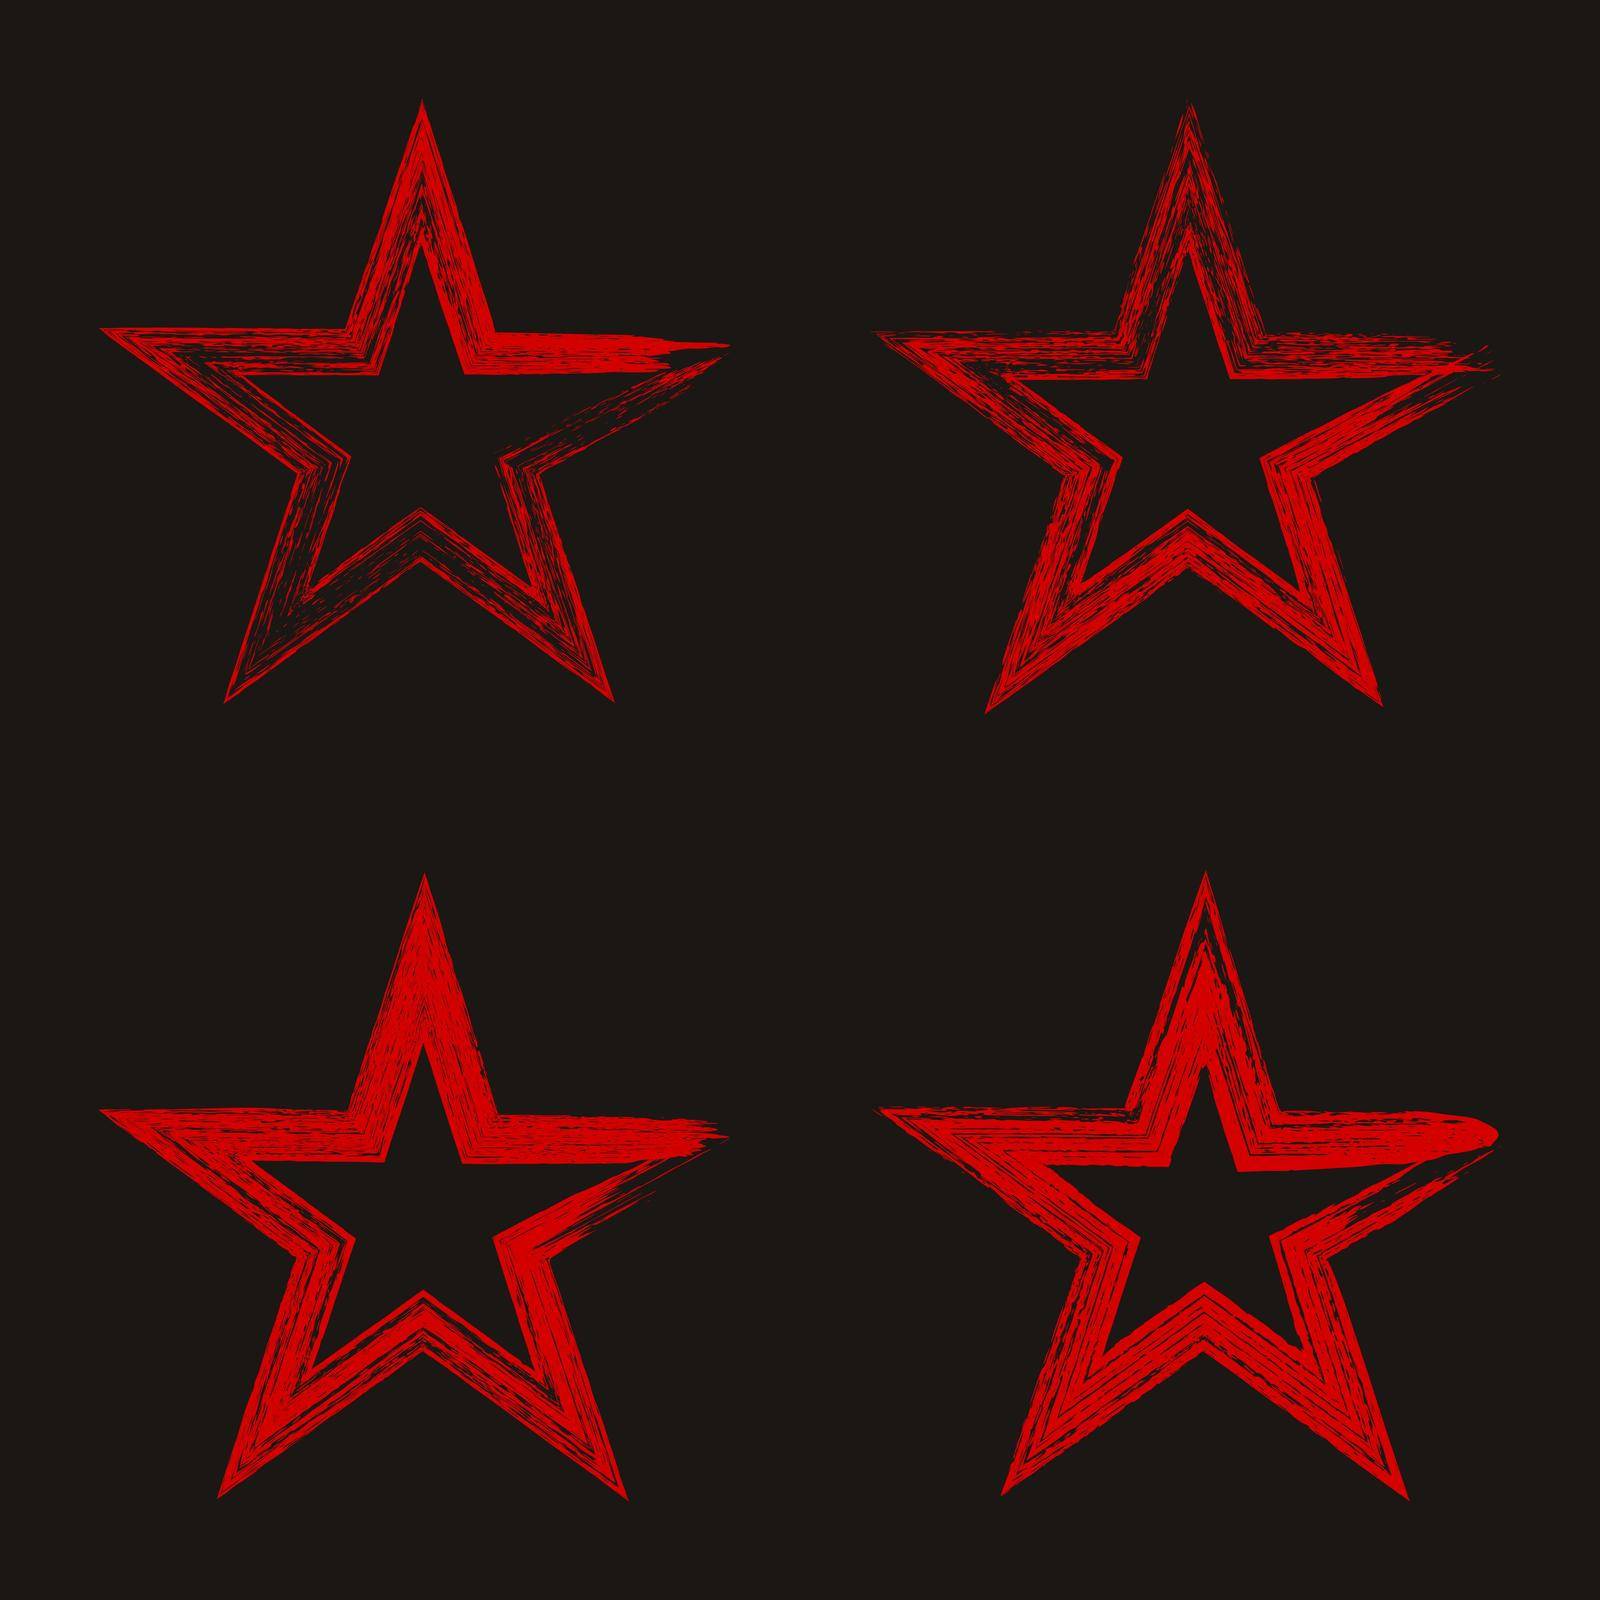 Red Star logo, sign. Set of stars for icons, badges